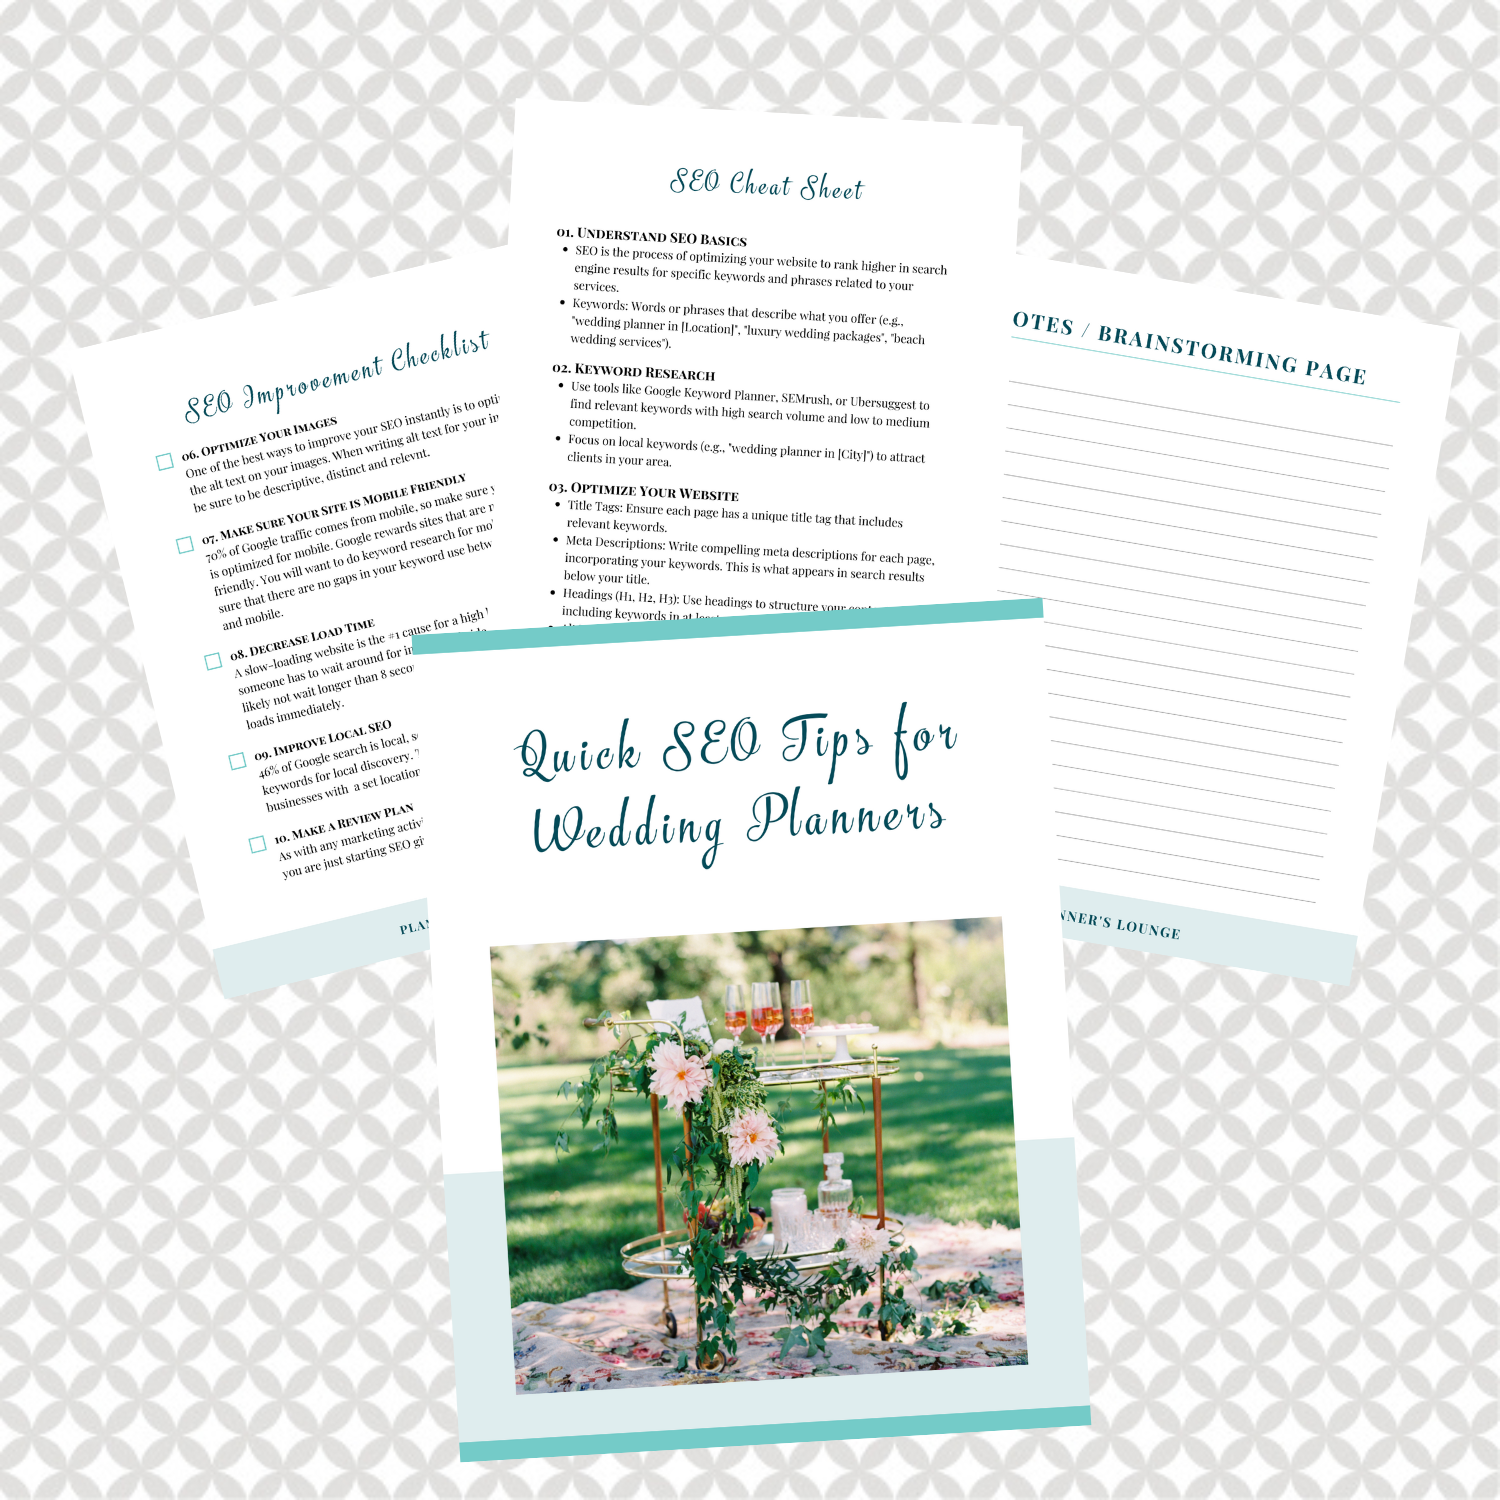 SEO Tips &amp; Checklist for Wedding Planners